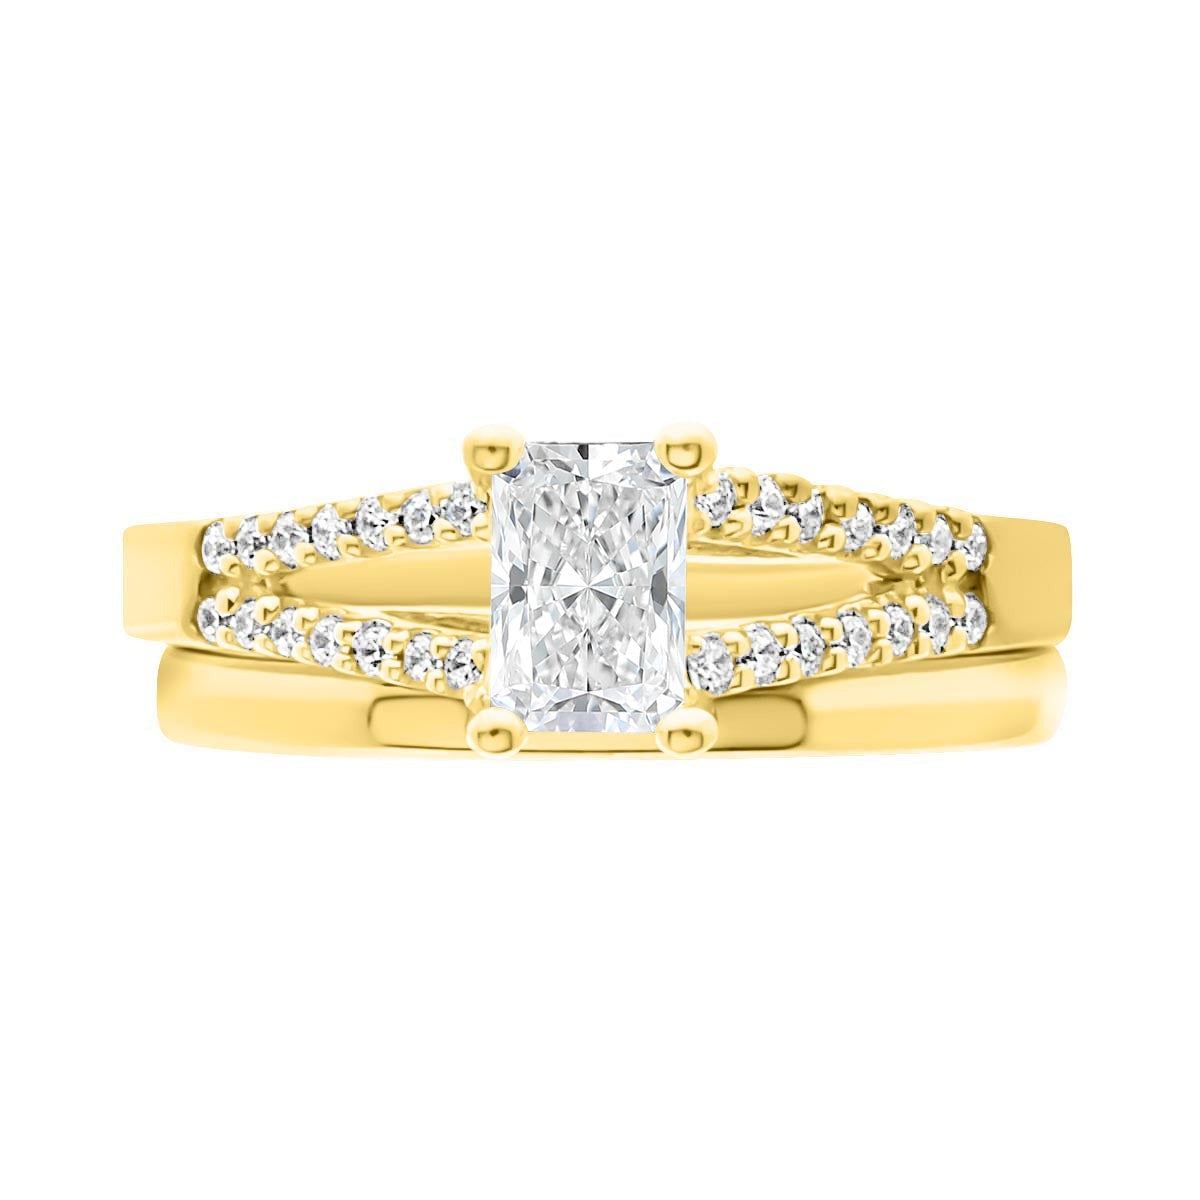 Radiant Cut Diamond Ring in yellow gold with a matching yellow gold plain wedding ring